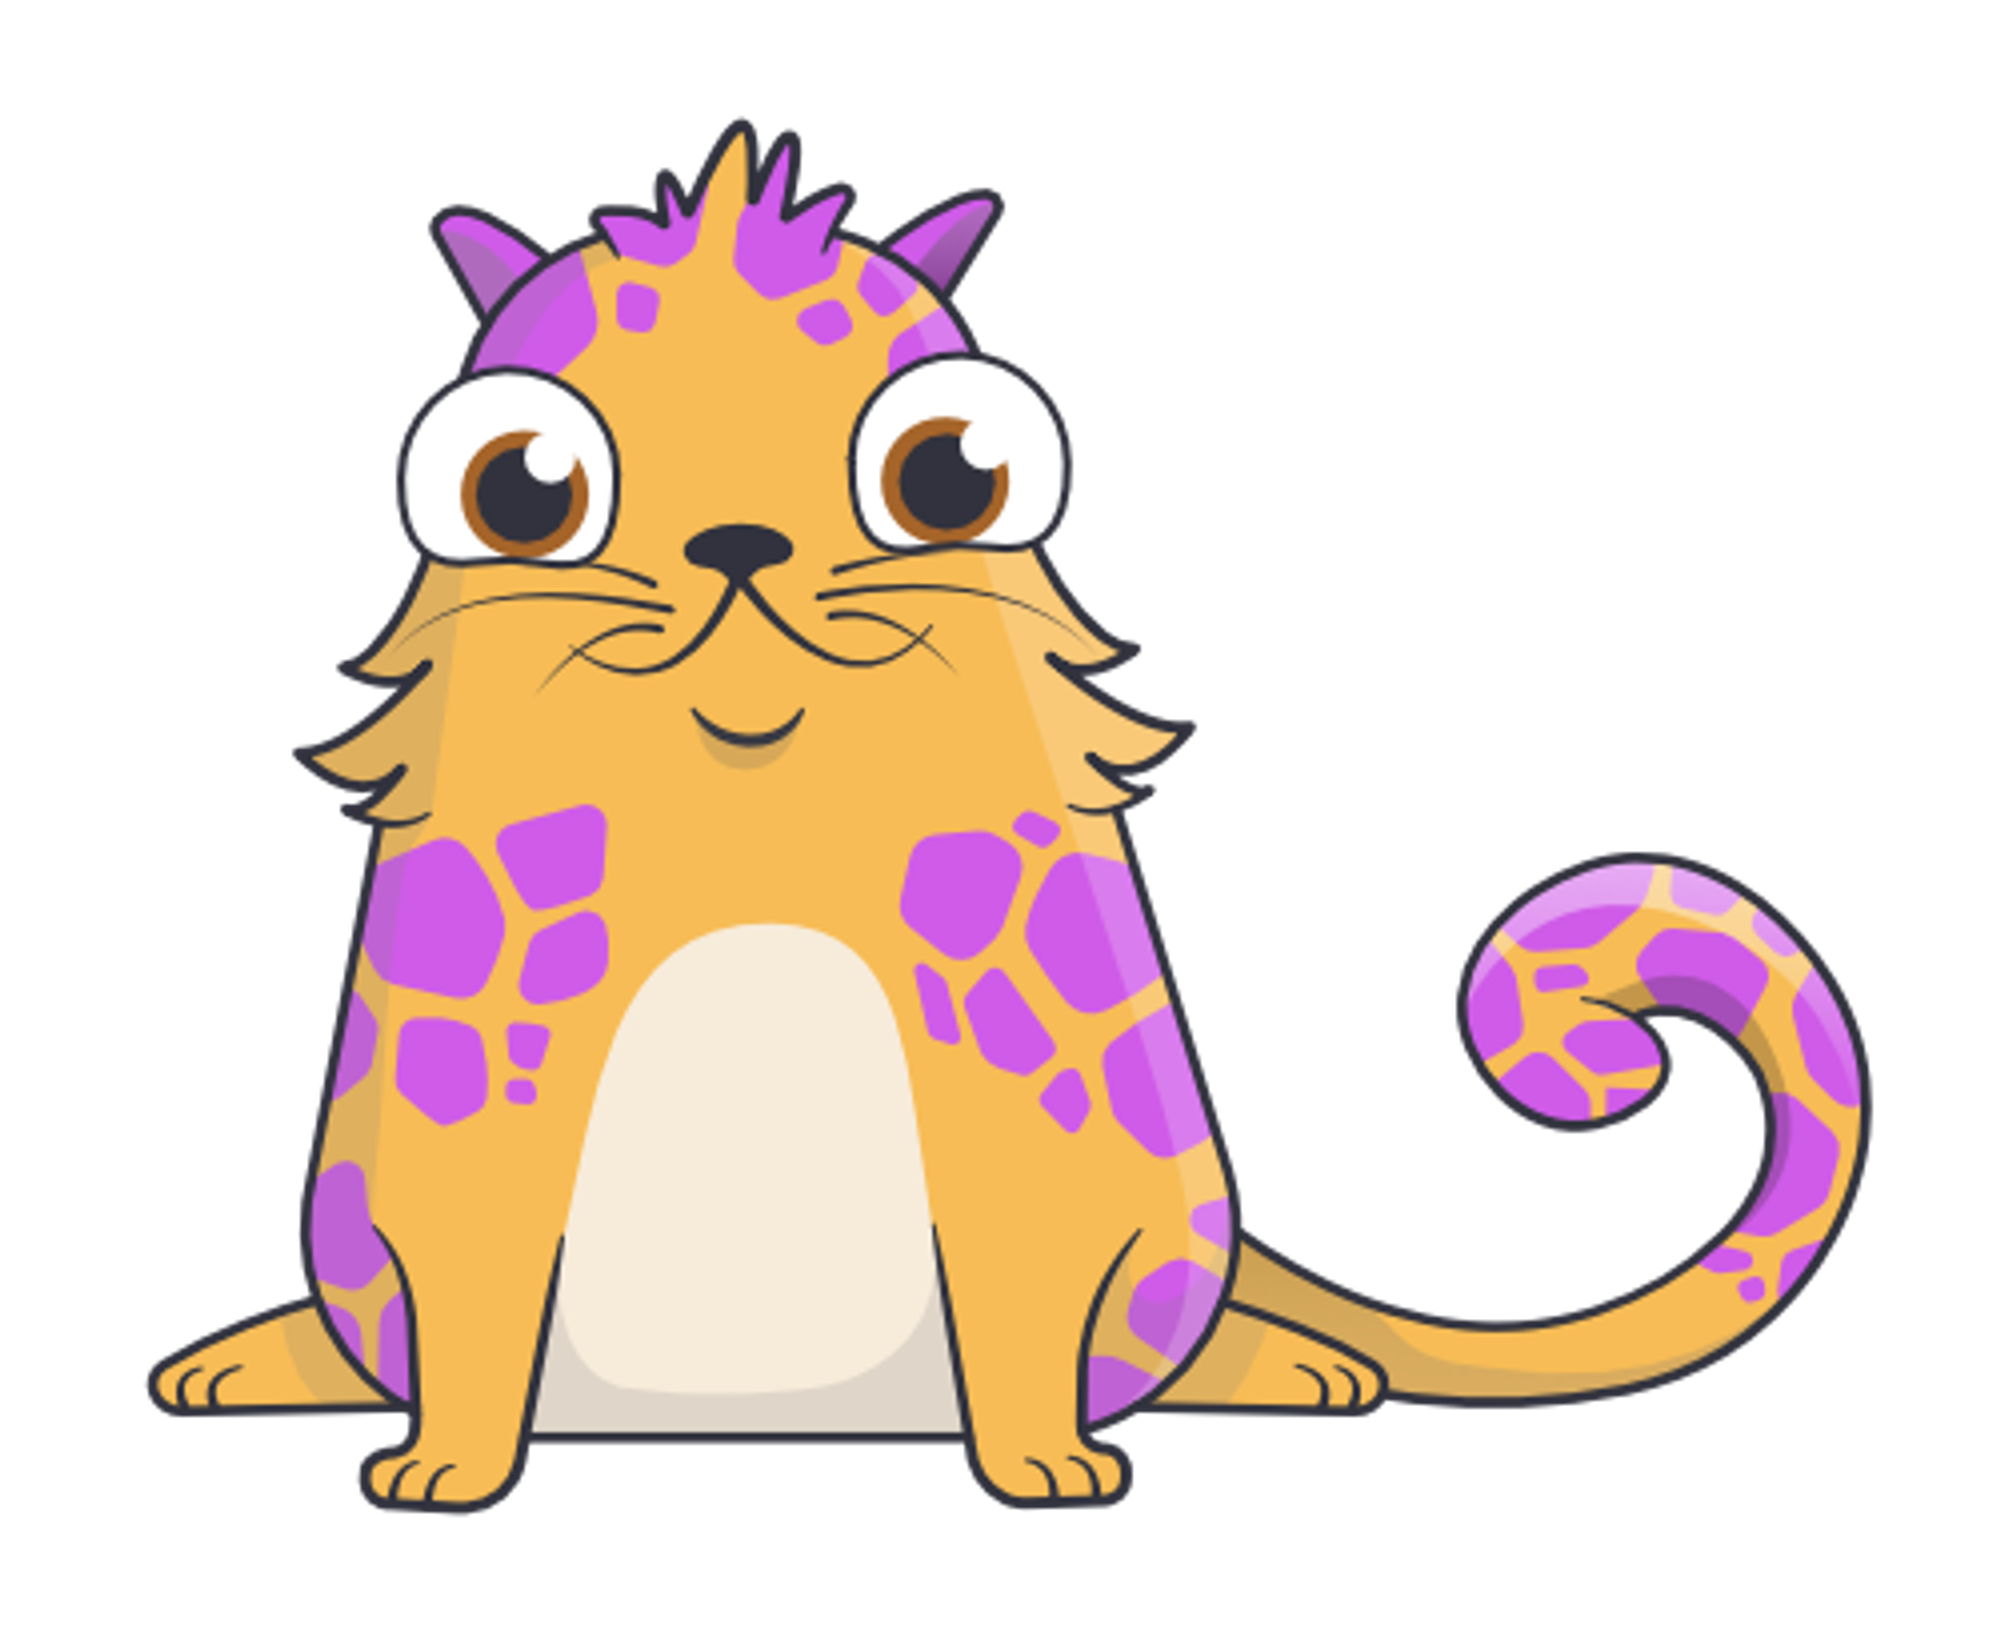 Cryptokitty #2 — this was one of the first NFT projects that became a success (And brought the Ethereum blockchain to a crawl in the process…)